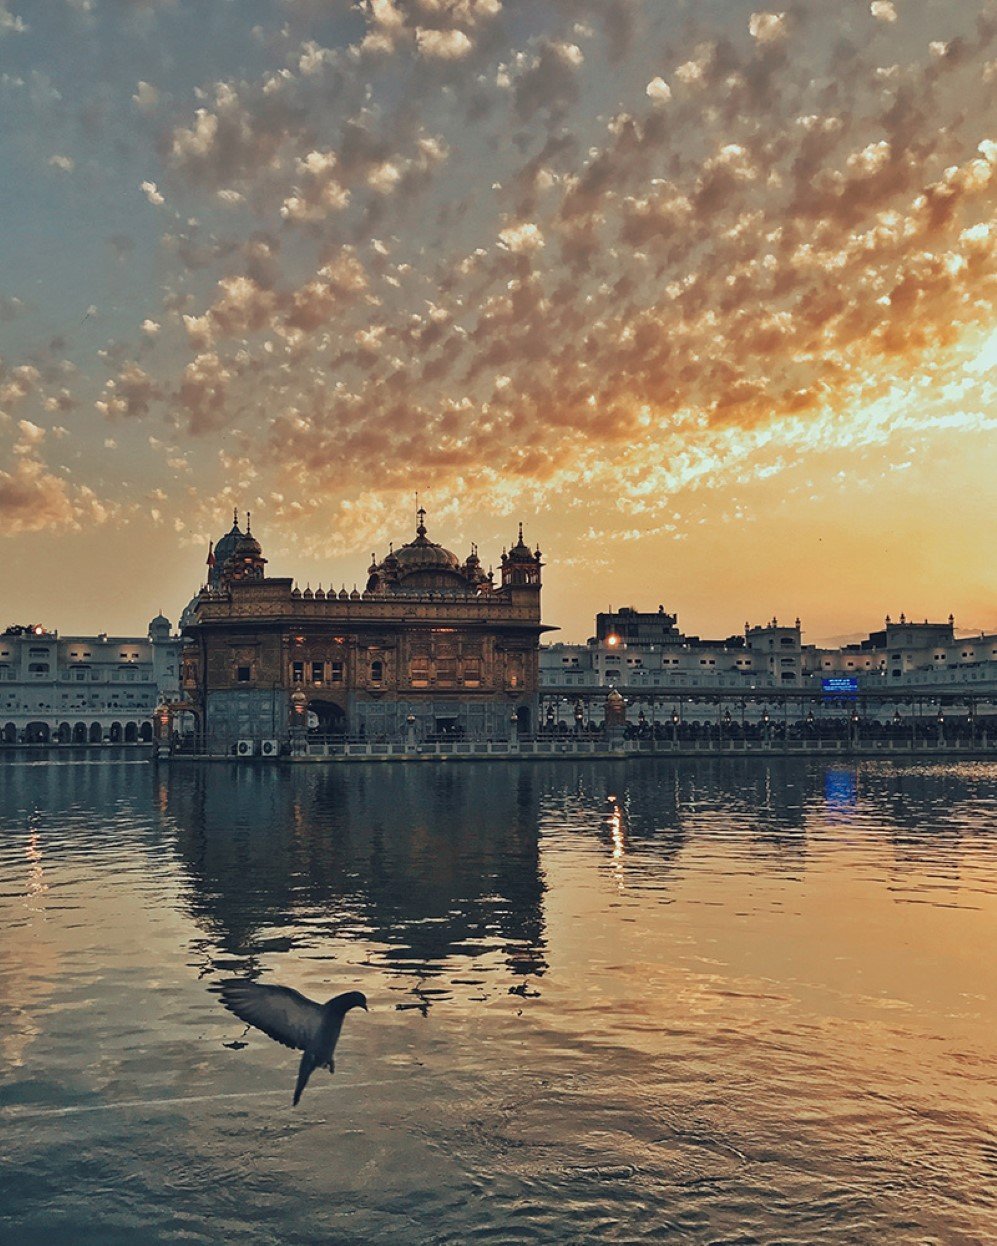 The sunset and the Golden Temple in Amritsar add radiance and beauty to each other. The ripple in water seems to be formed by doves’ flapping of wings. I think photography is derived from life, and only people who love life can take a picture of temperature.